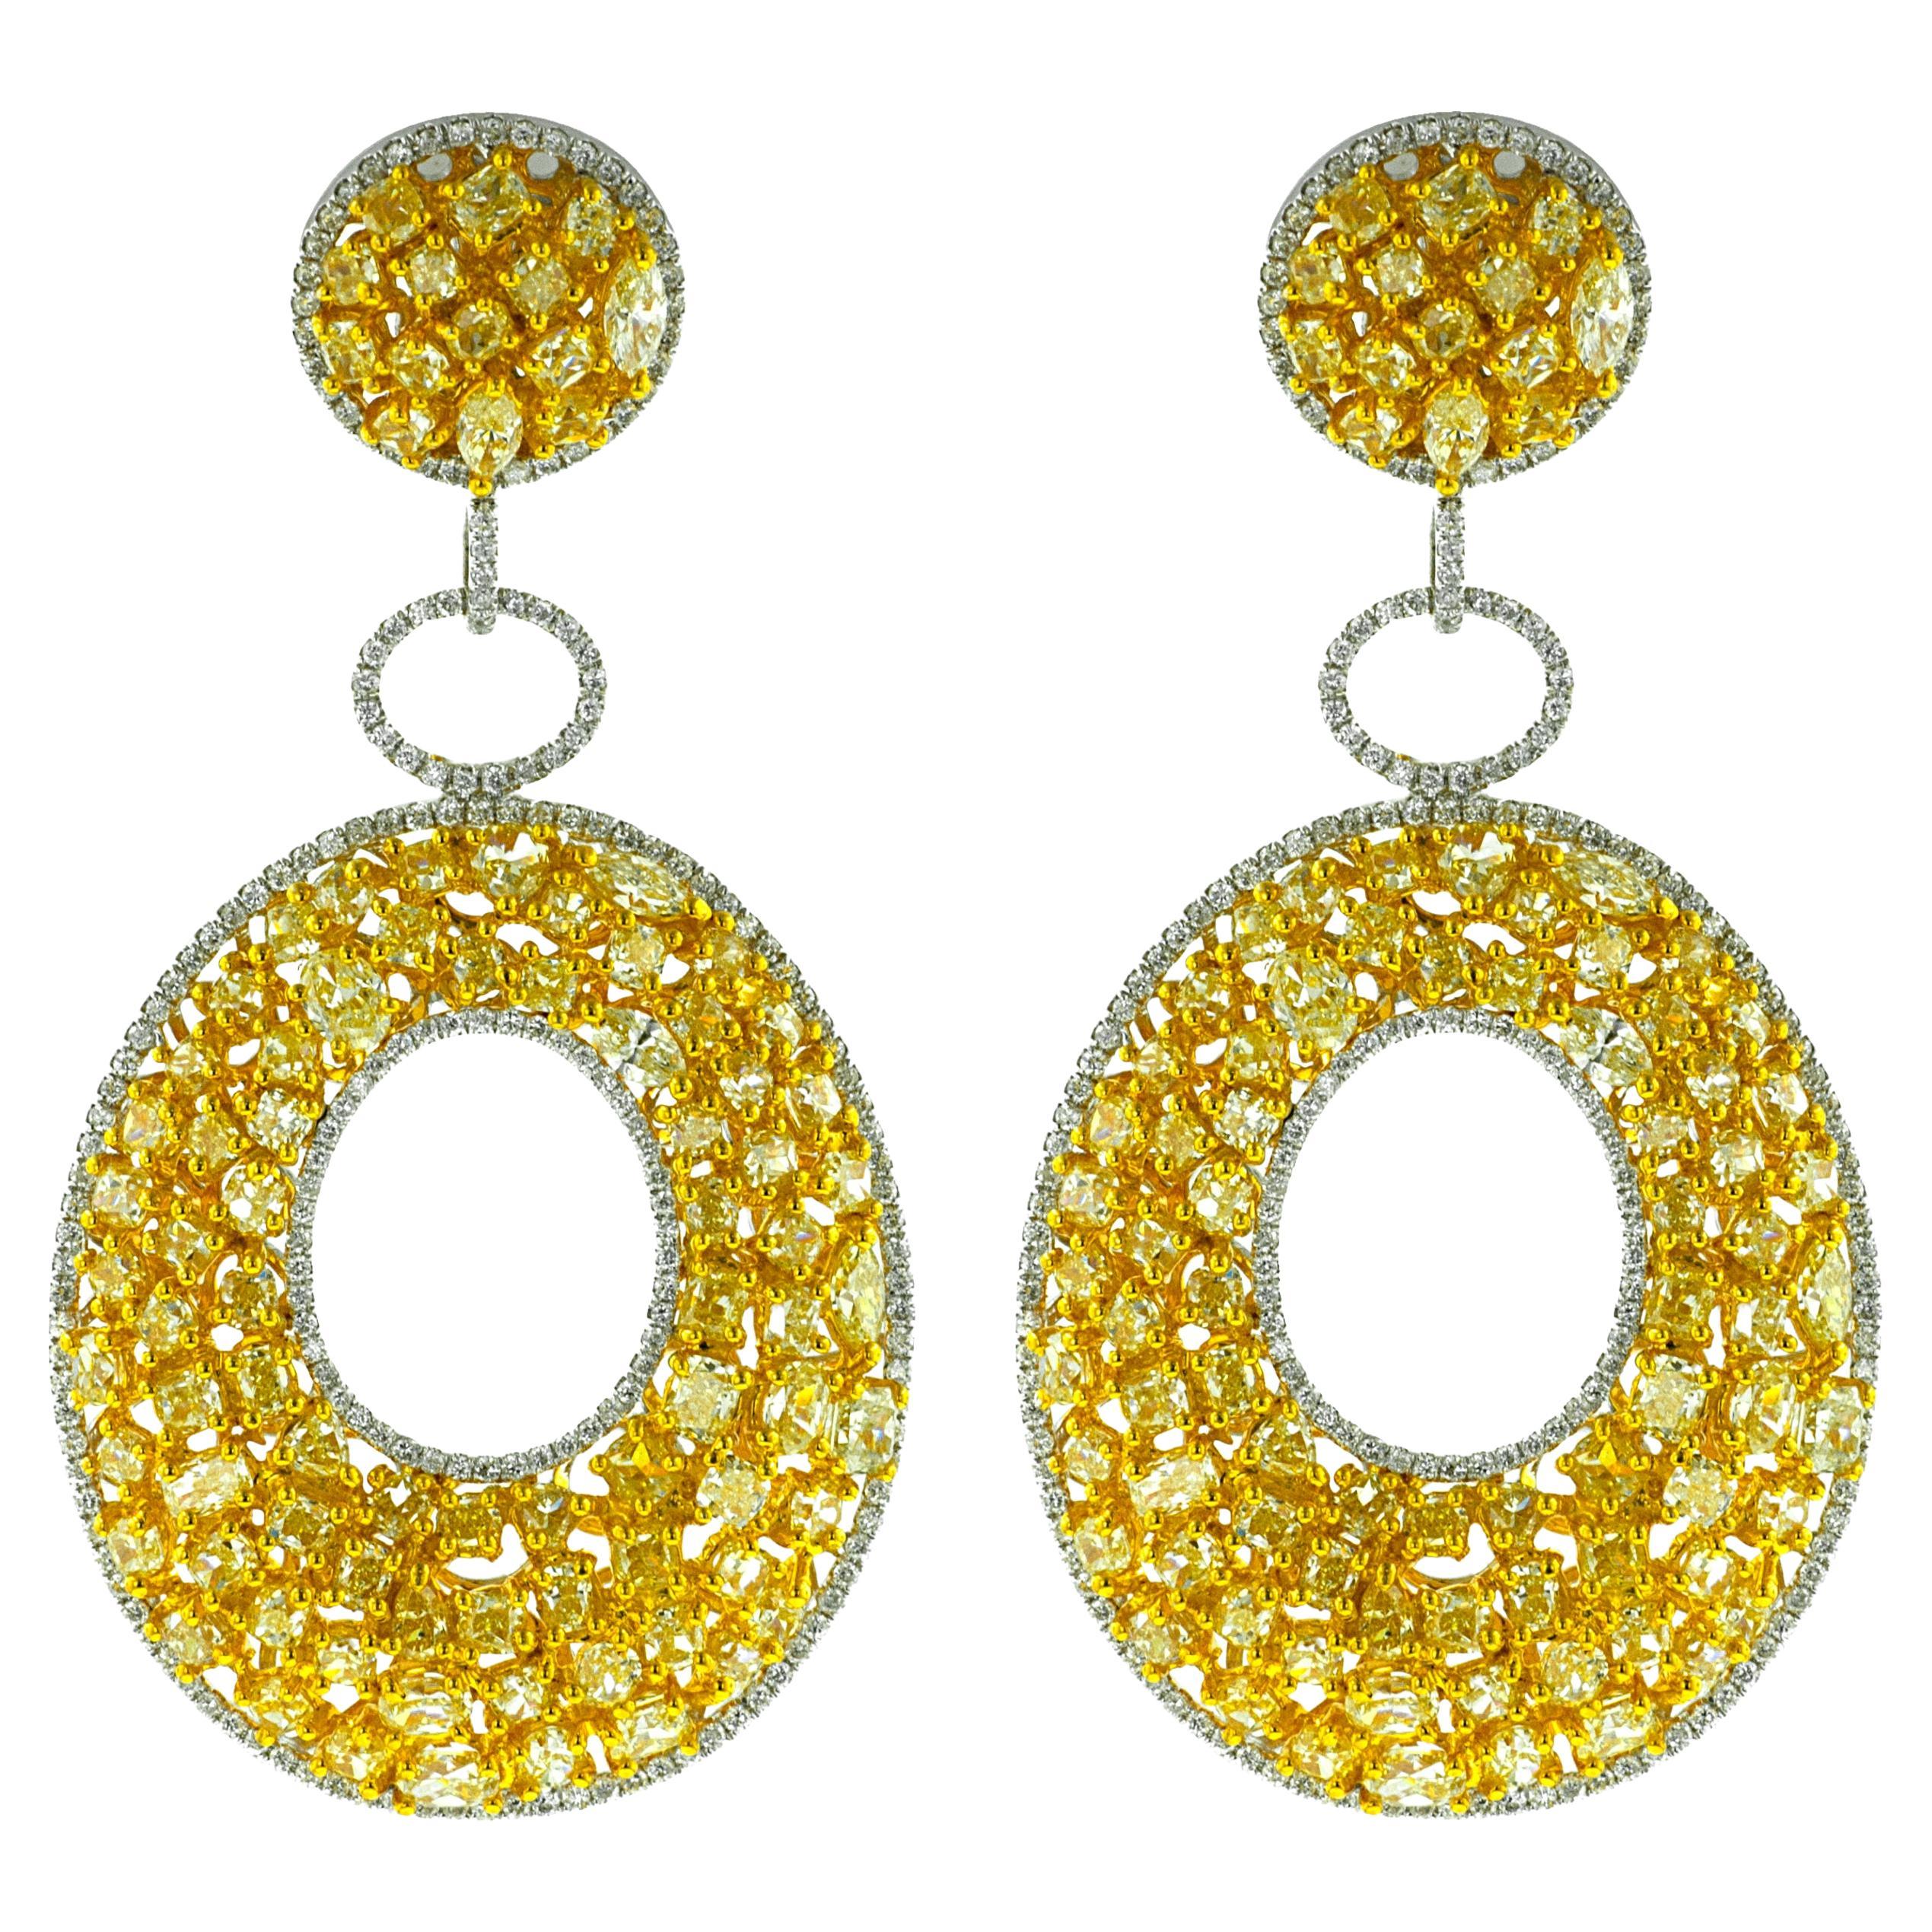 Diana M. 18 kt White and Yellow Gold Fancy Diamond earrings containing 20.12 cts